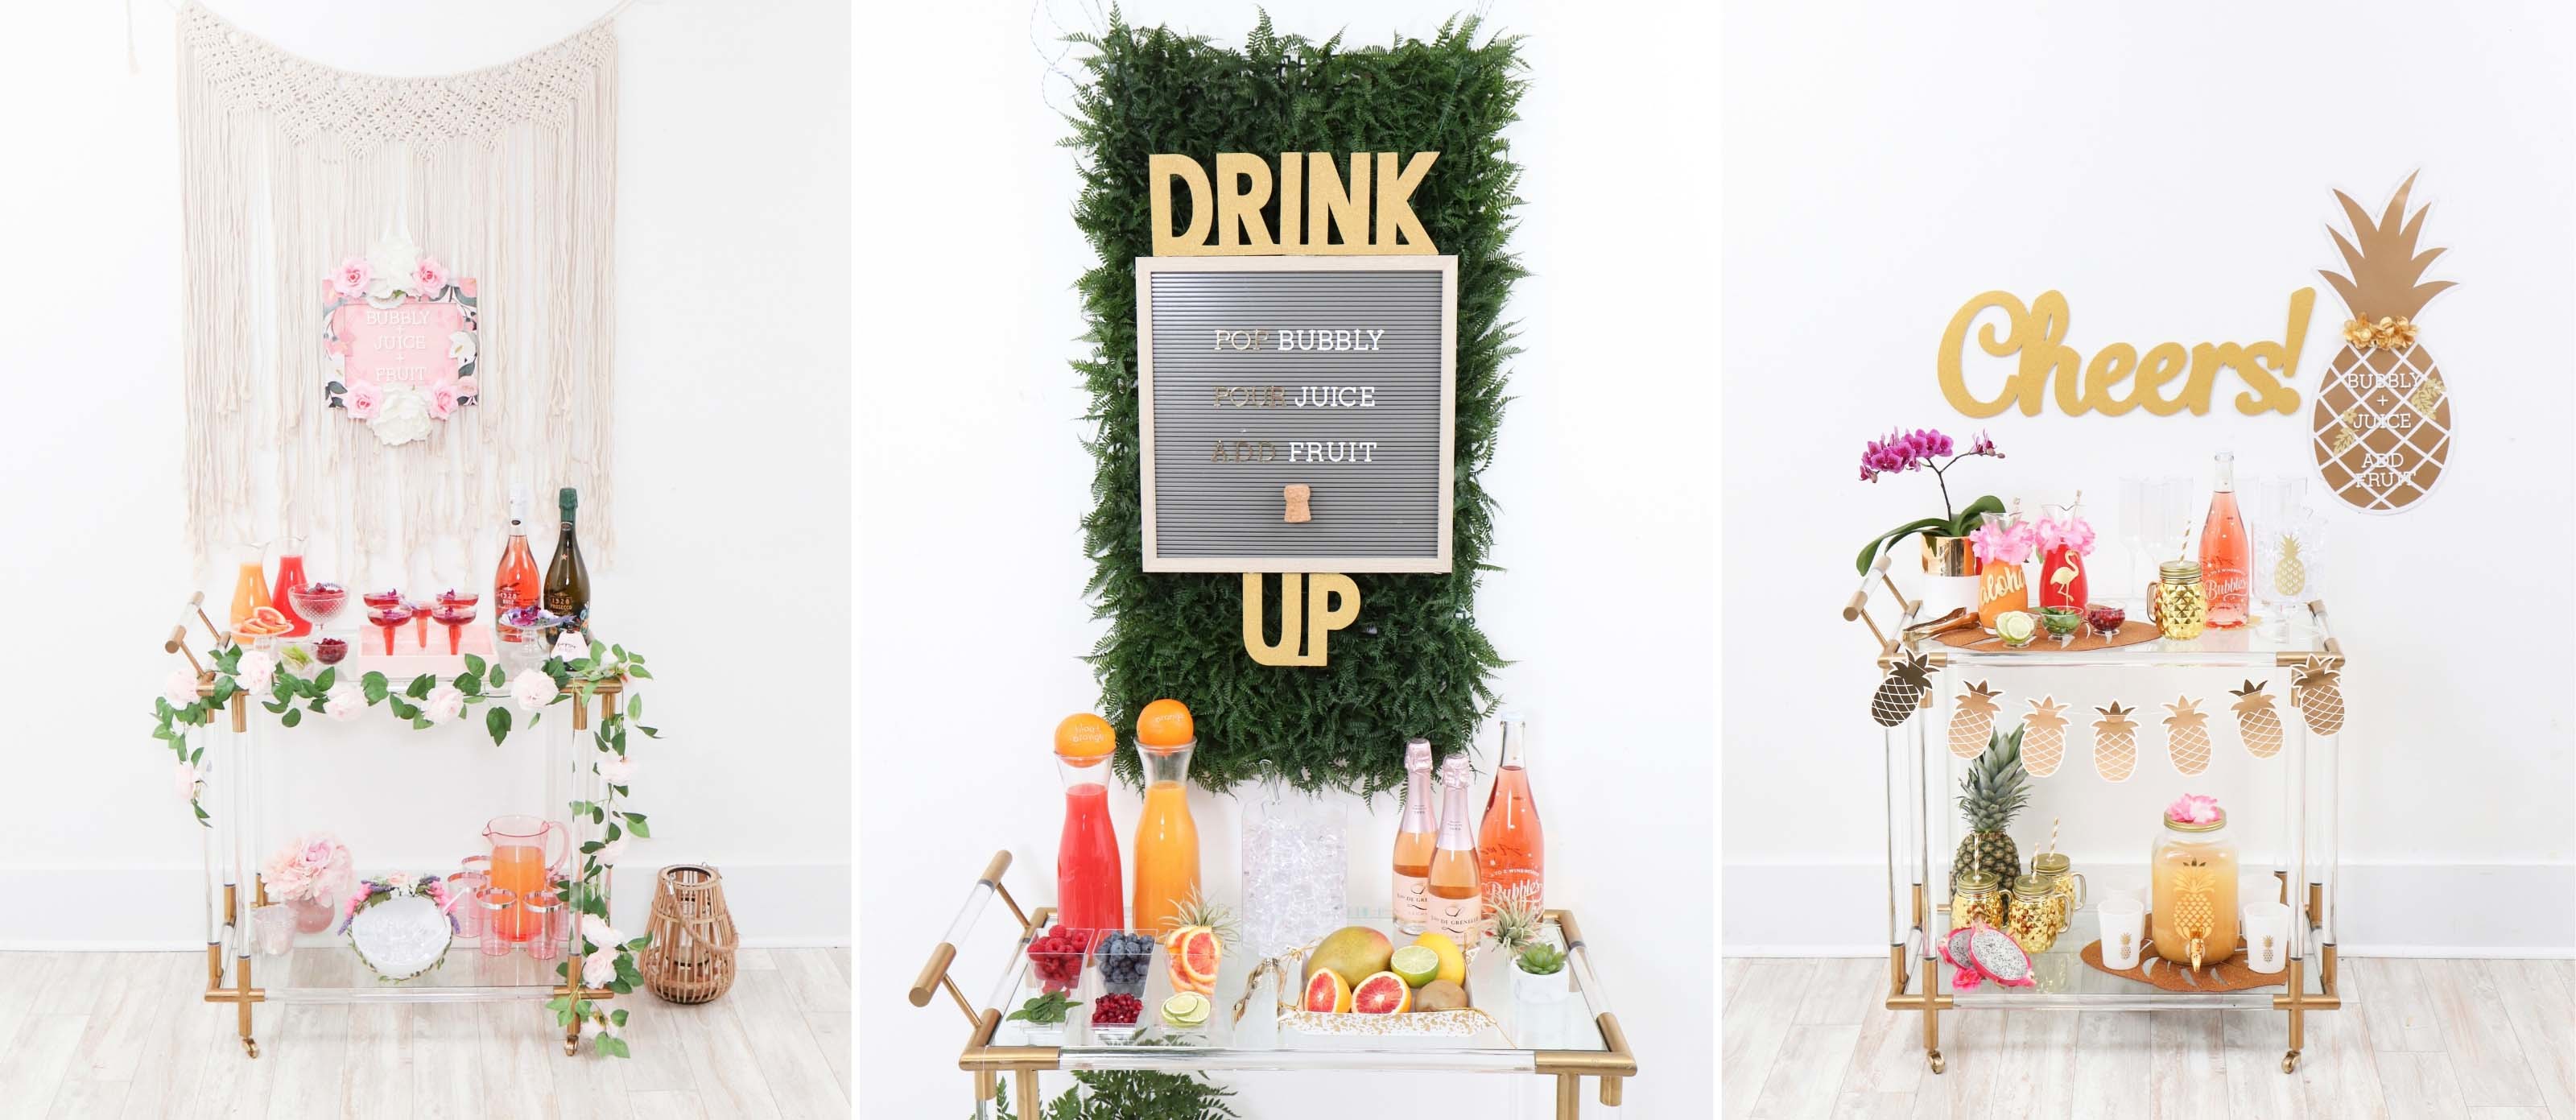 How to Set Up a DIY Mimosa Bar - Pineapple Paper Co.